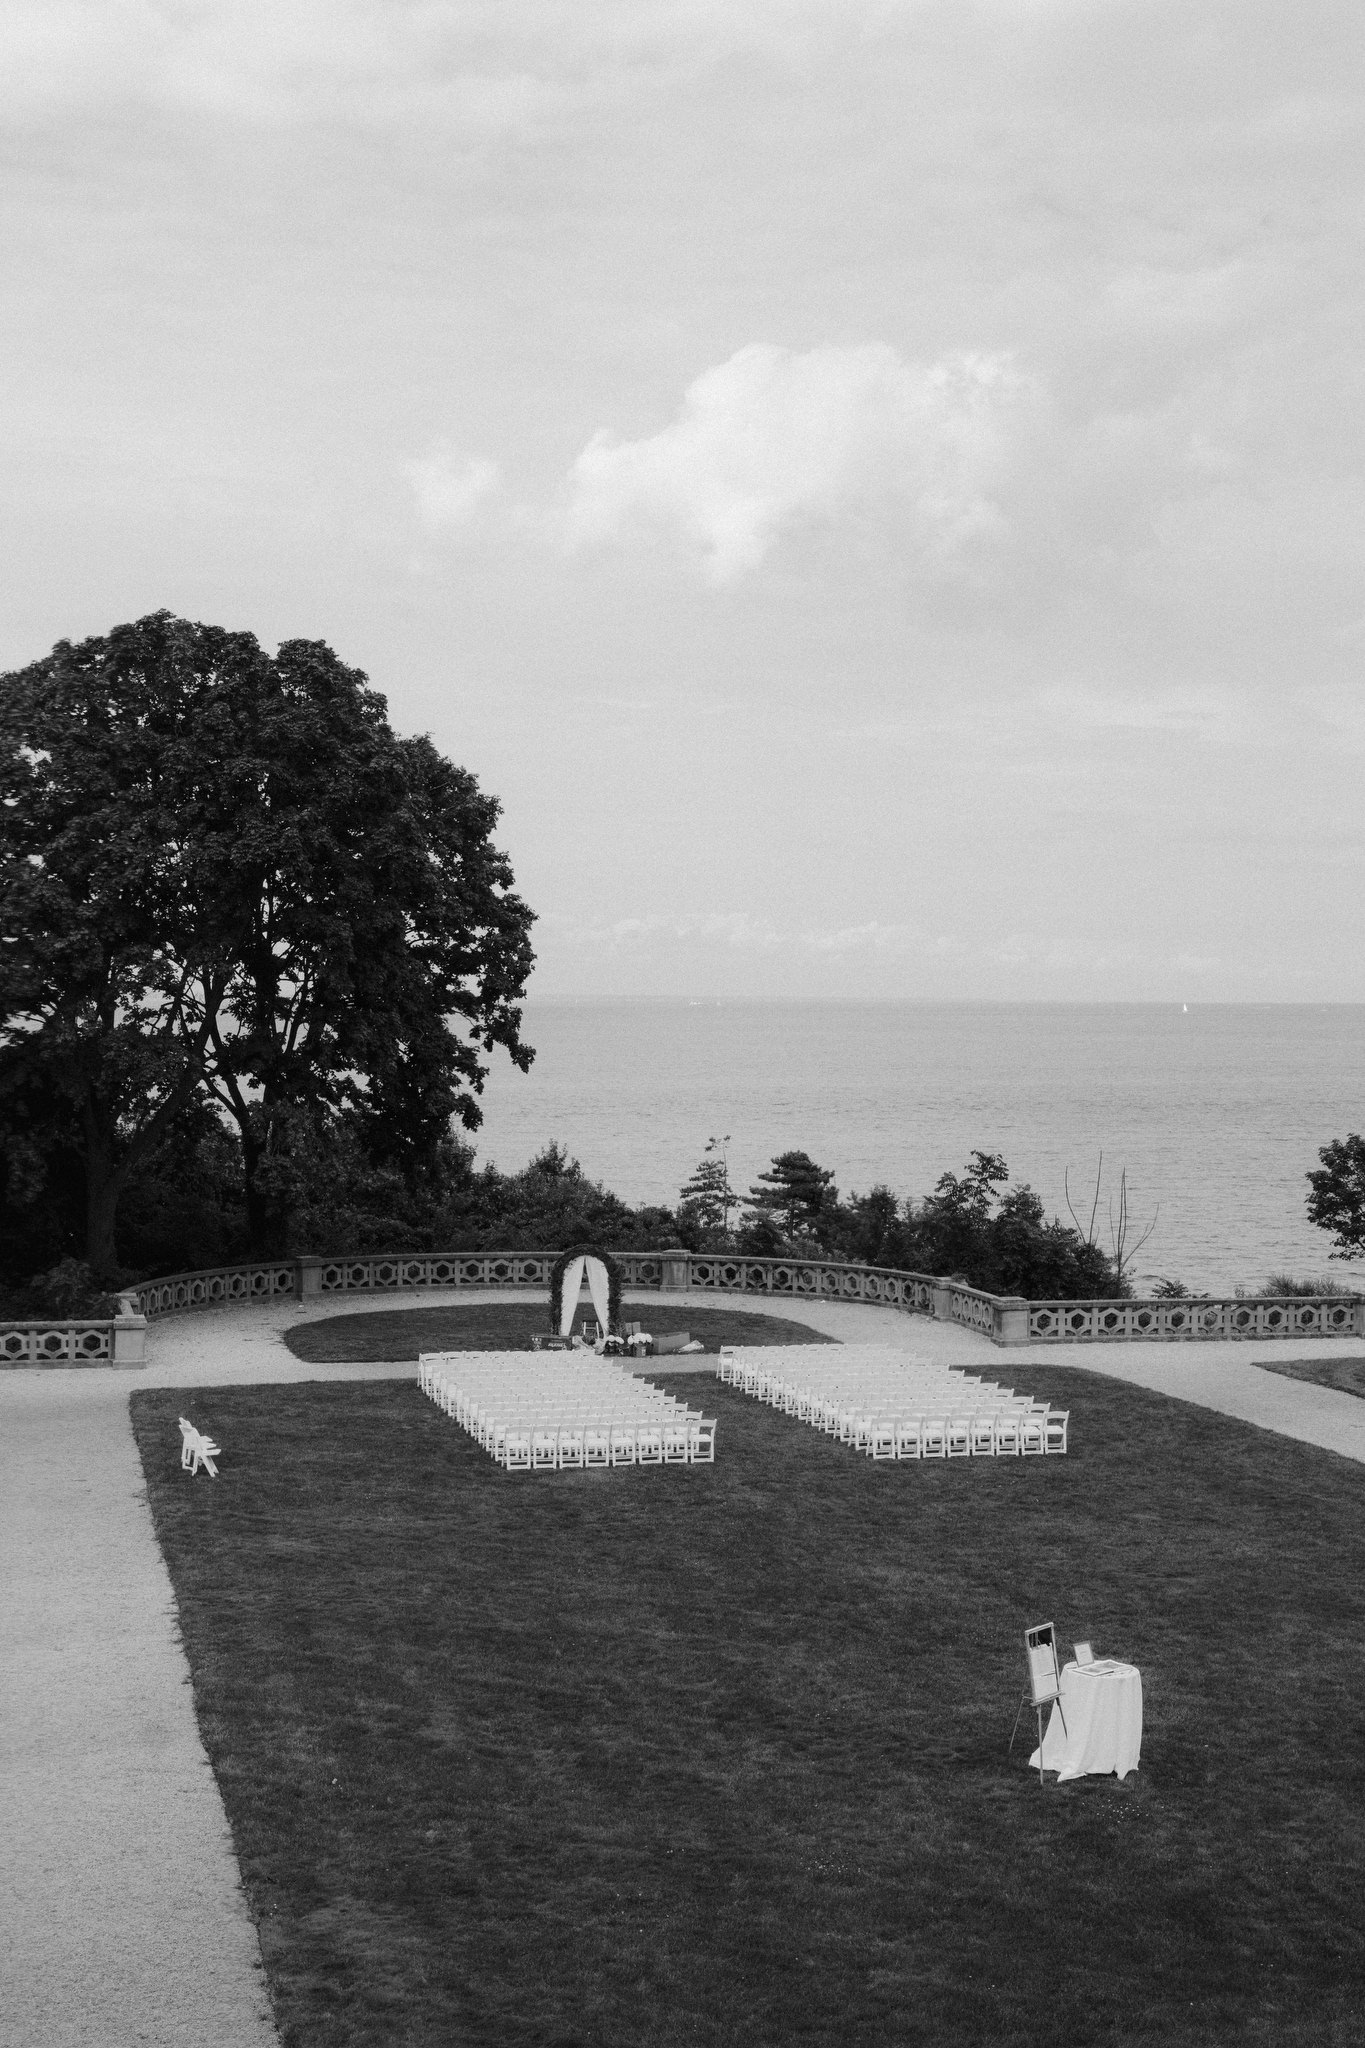 View of wedding ceremony set up on lawn beside ocean